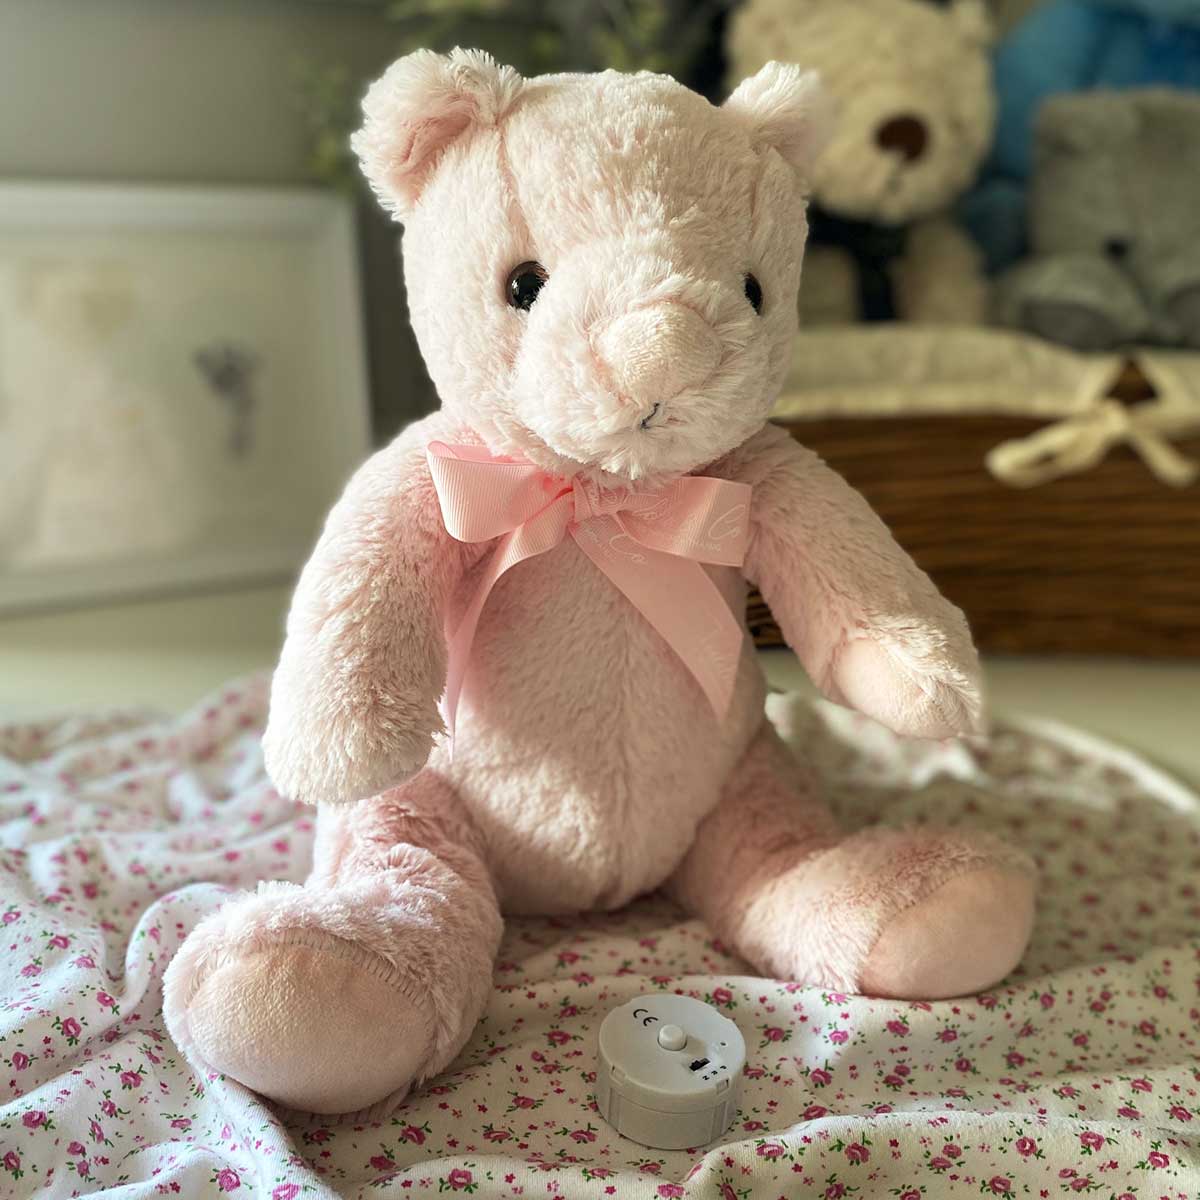 Record-A-Voice Pink Teddy Bear